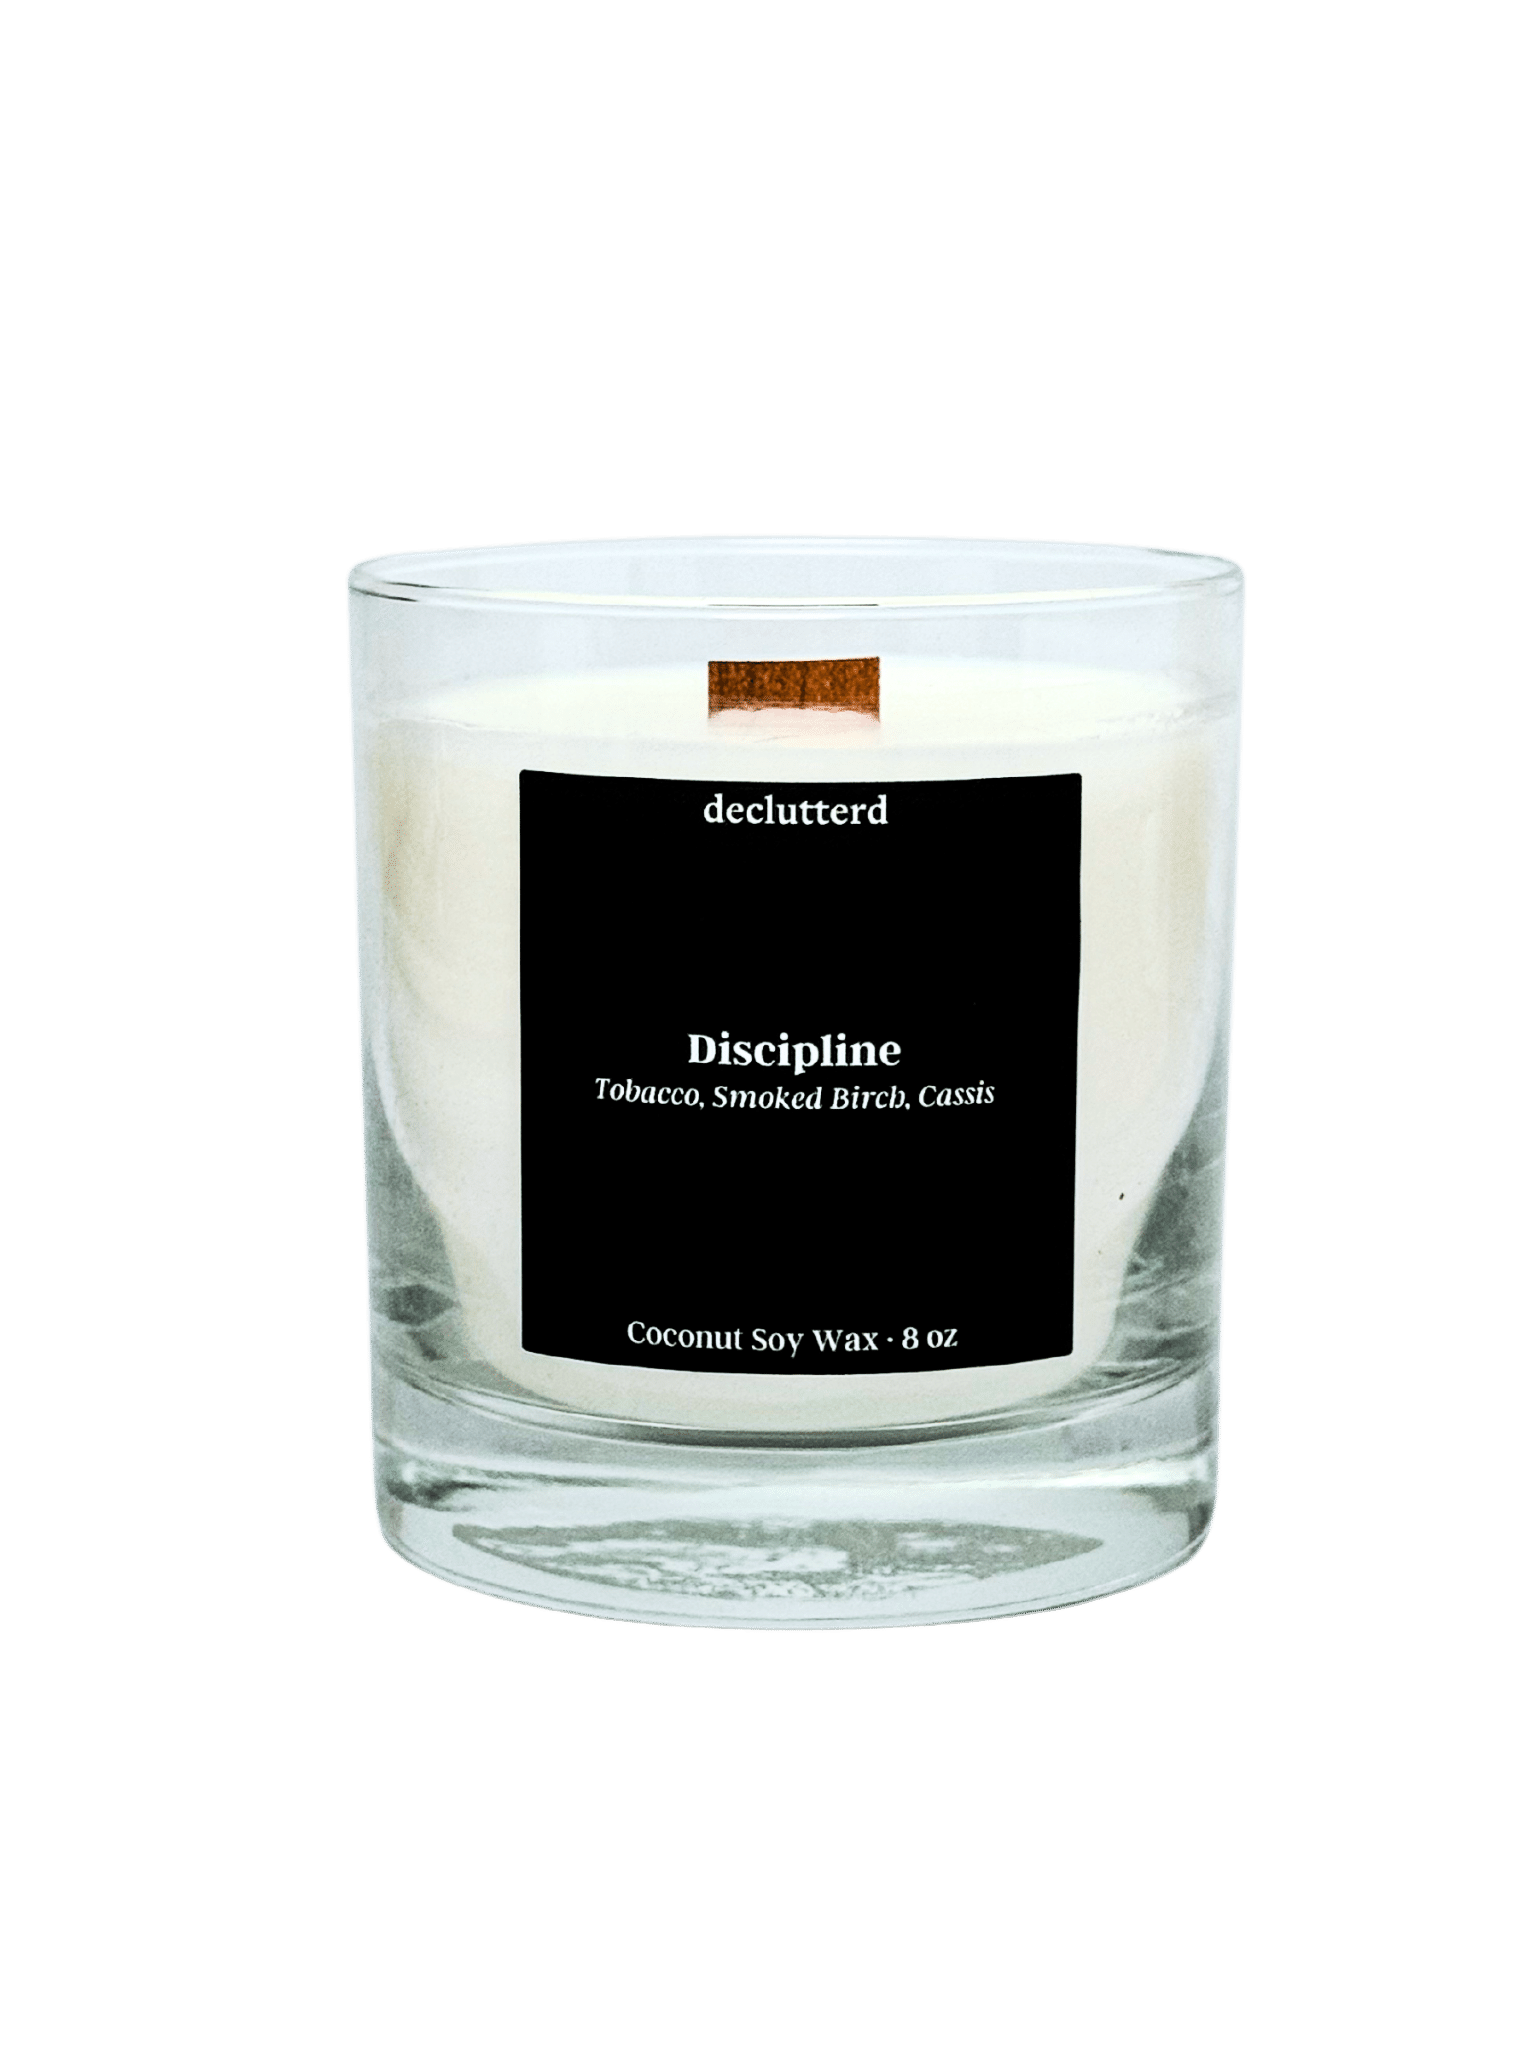 Bear Scat, Soy Candle with Wooden Wick